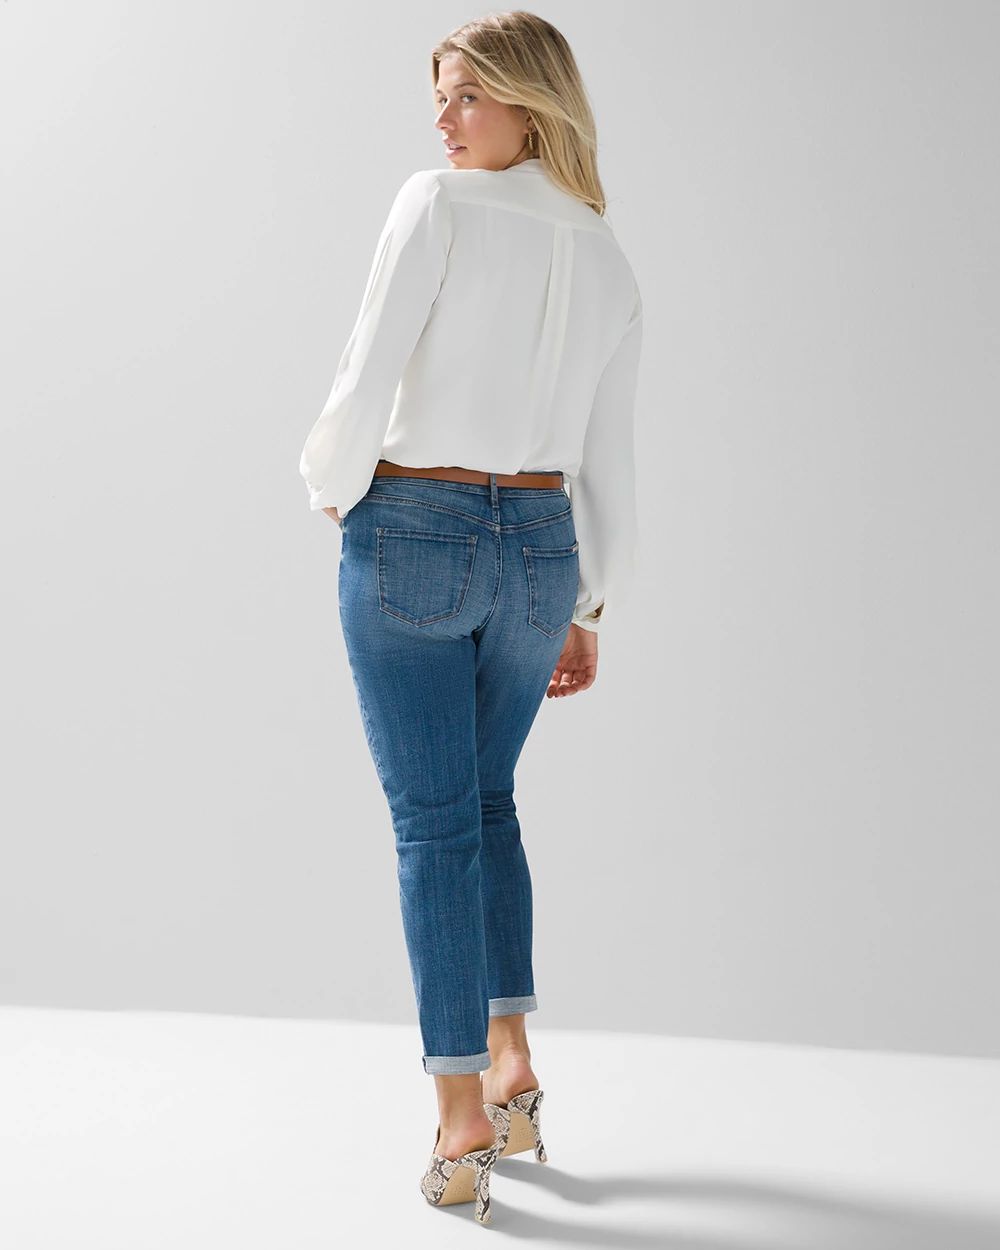 Curvy Mid-Rise Everyday Soft Denim  Girlfriend Jeans click to view larger image.